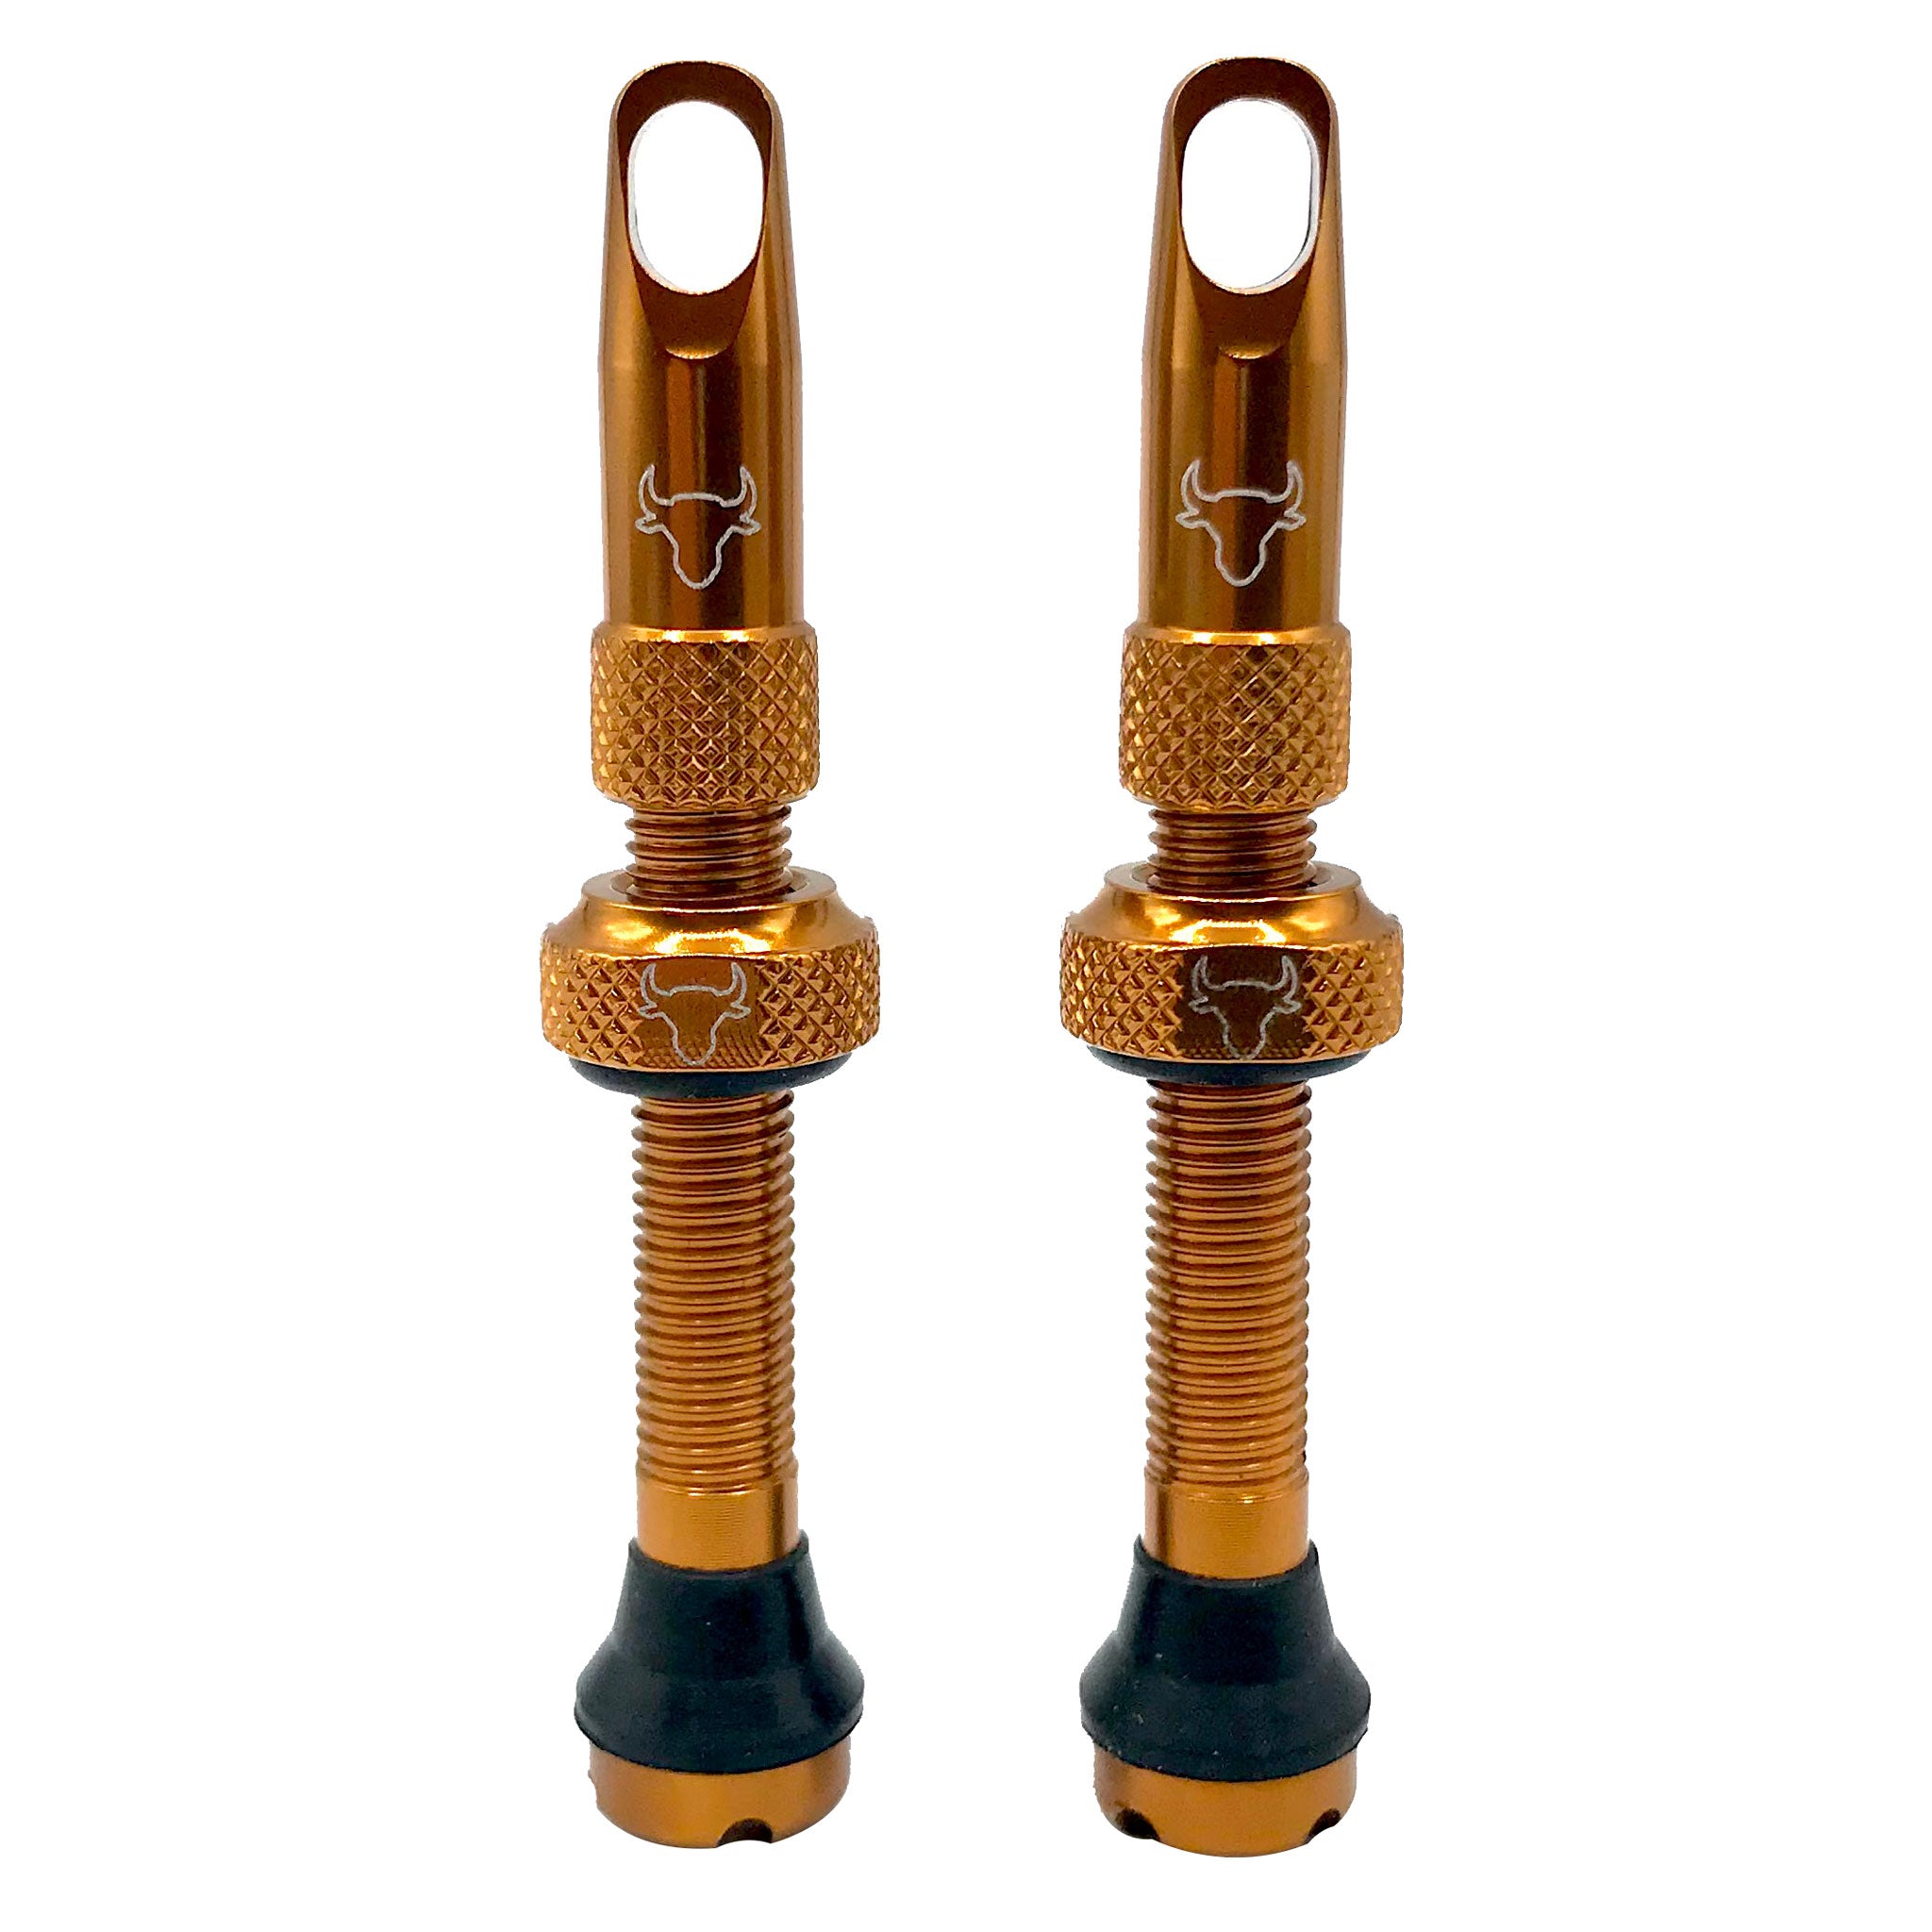 Hold Fast Cycling Tubeless Valve Stem 42mm (Pair) - Bronze